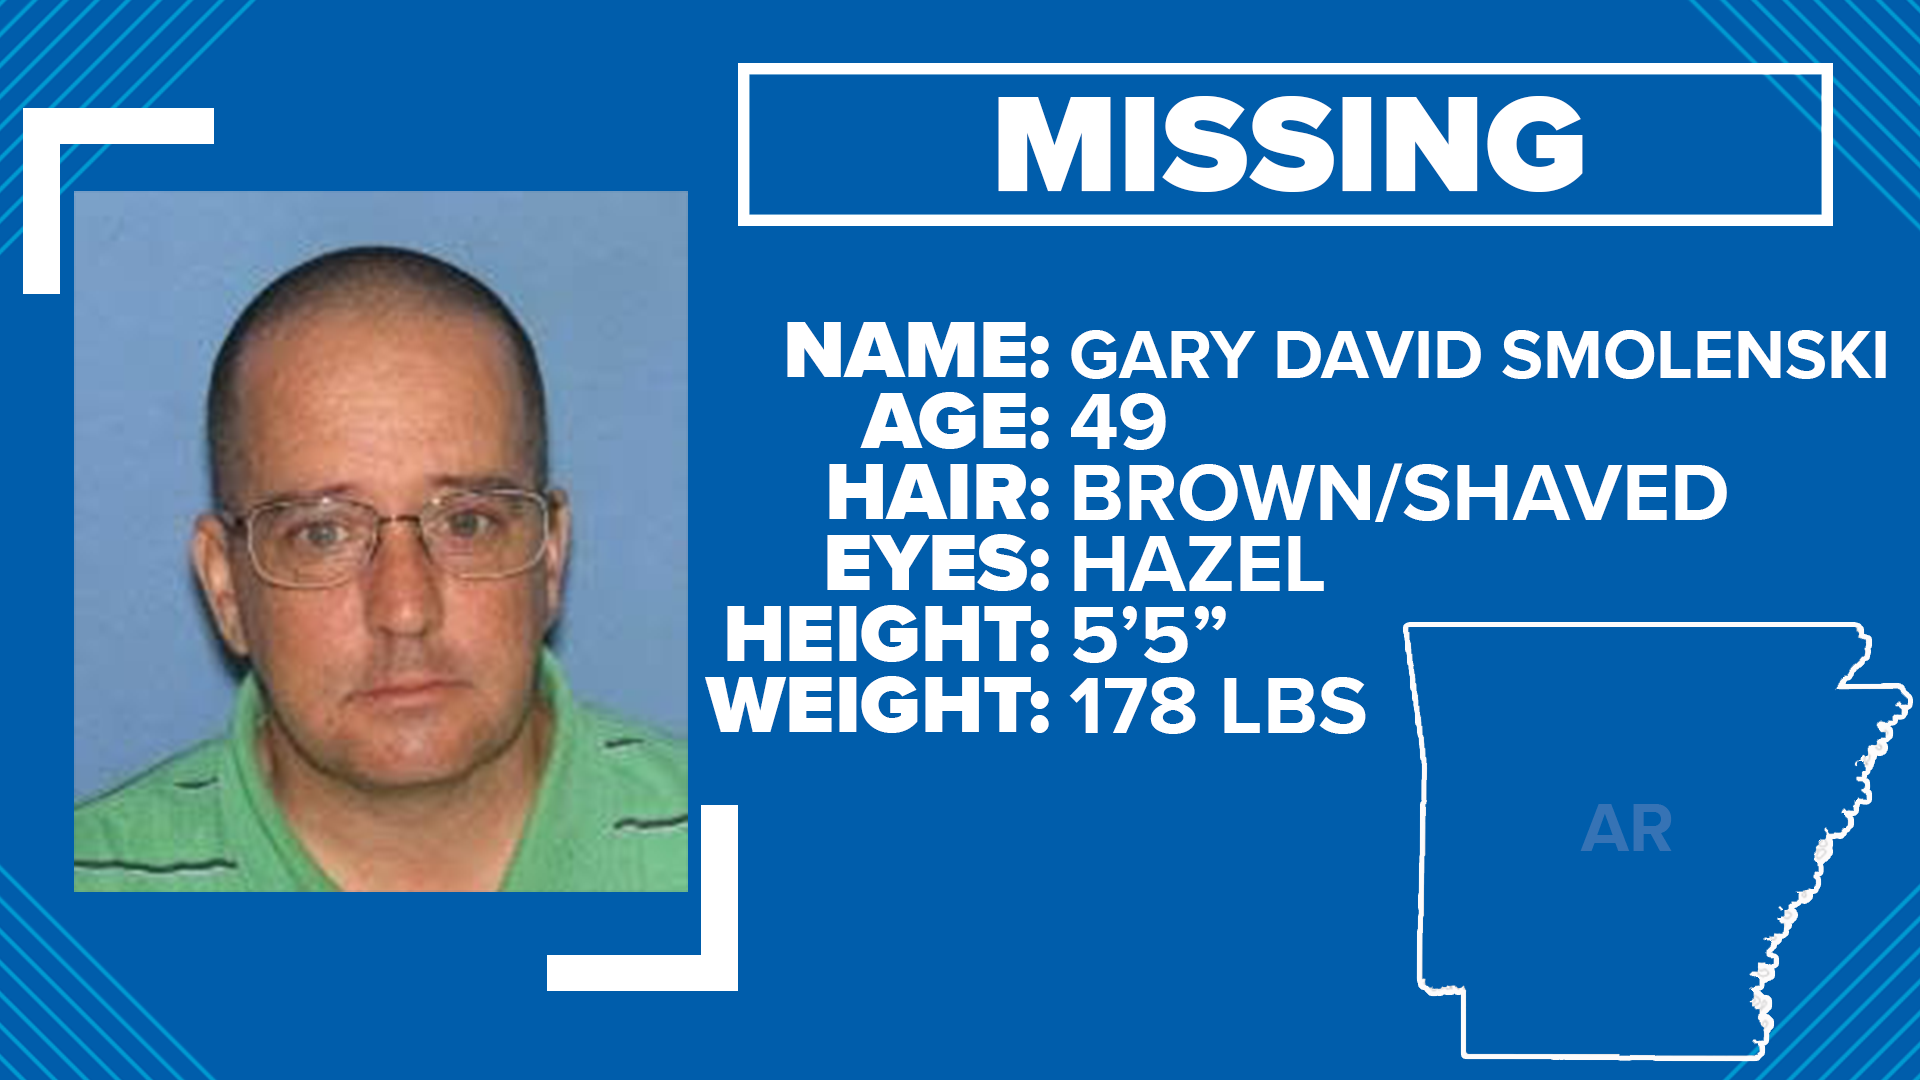 The Arkansas State Police activated a Silver Alert for a missing 49-year-old man out of North Little Rock.